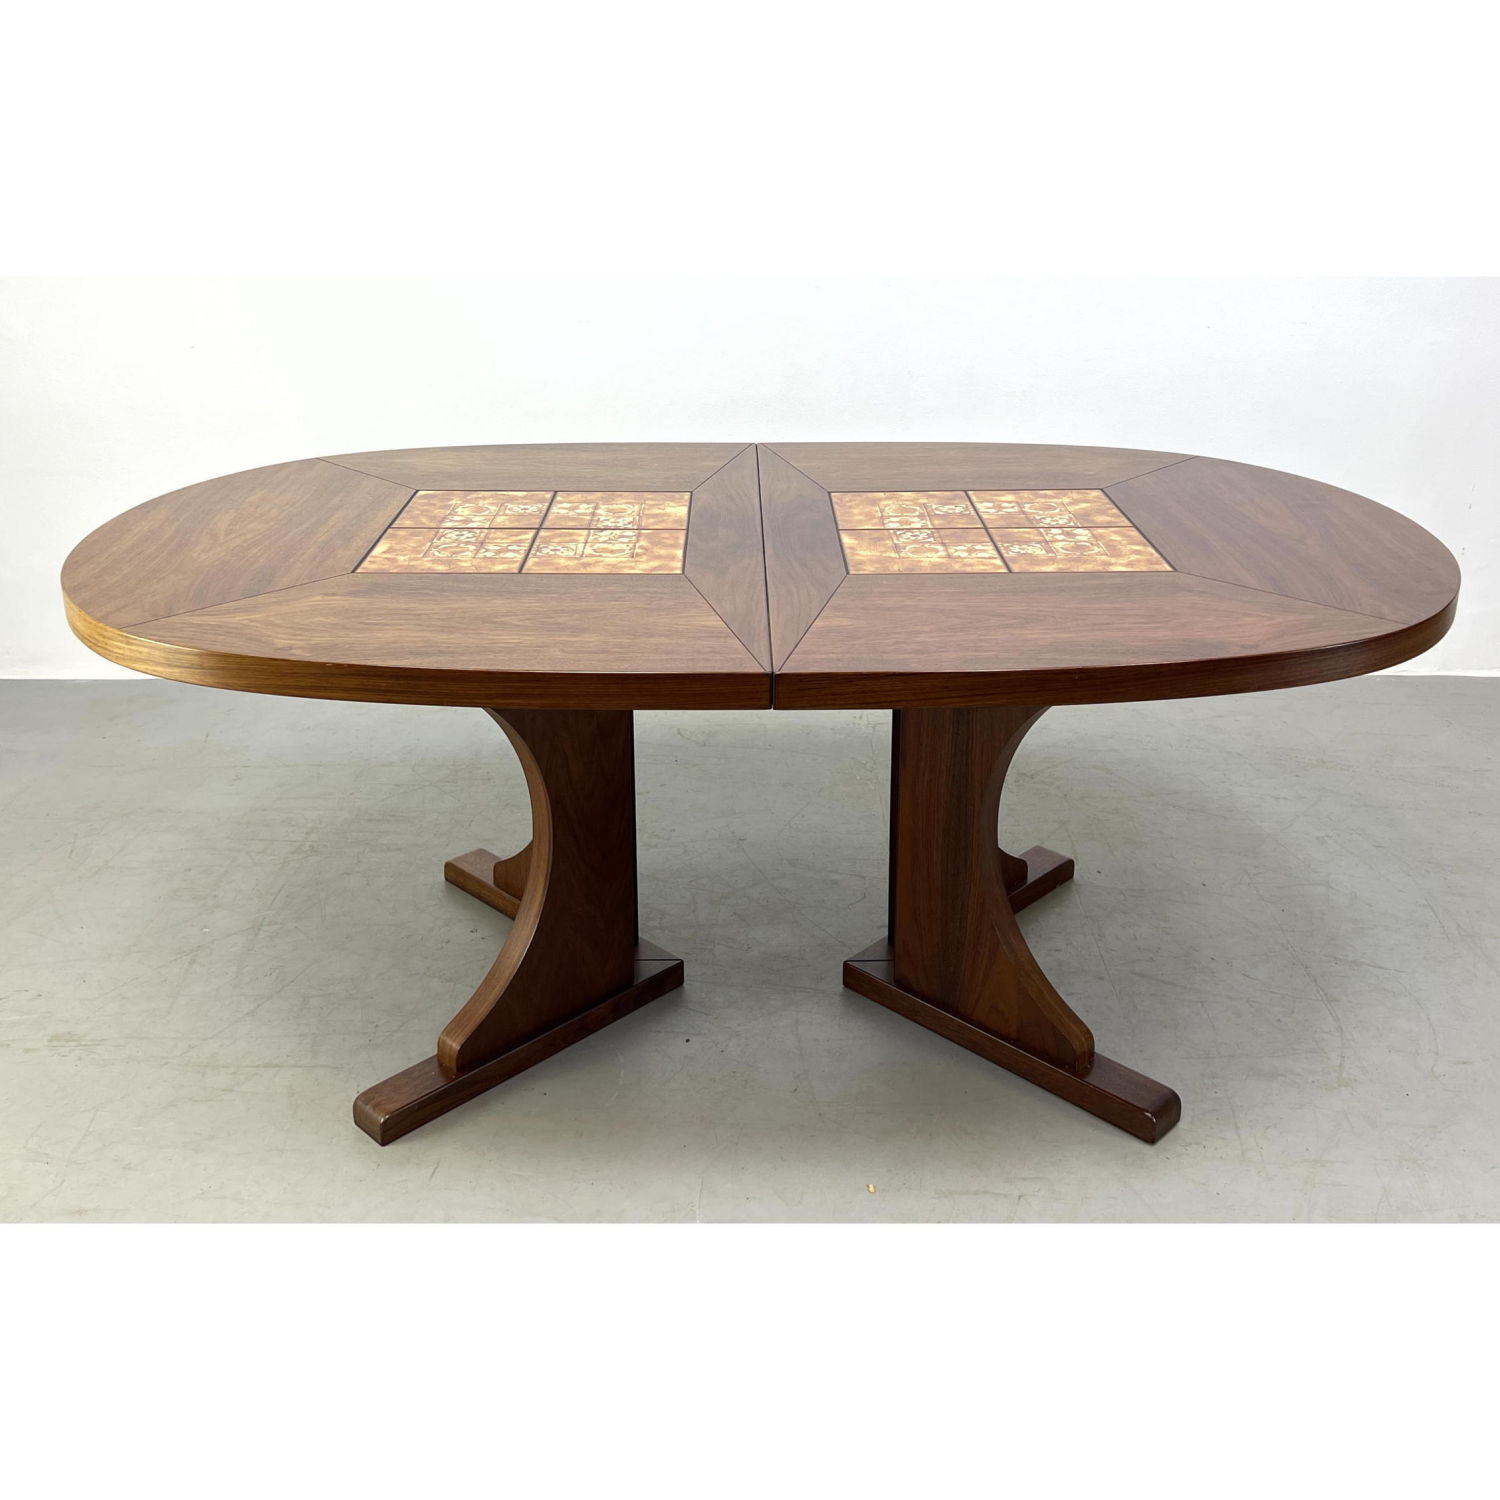 Rosewood and Tile Dining Table  2b9ec5